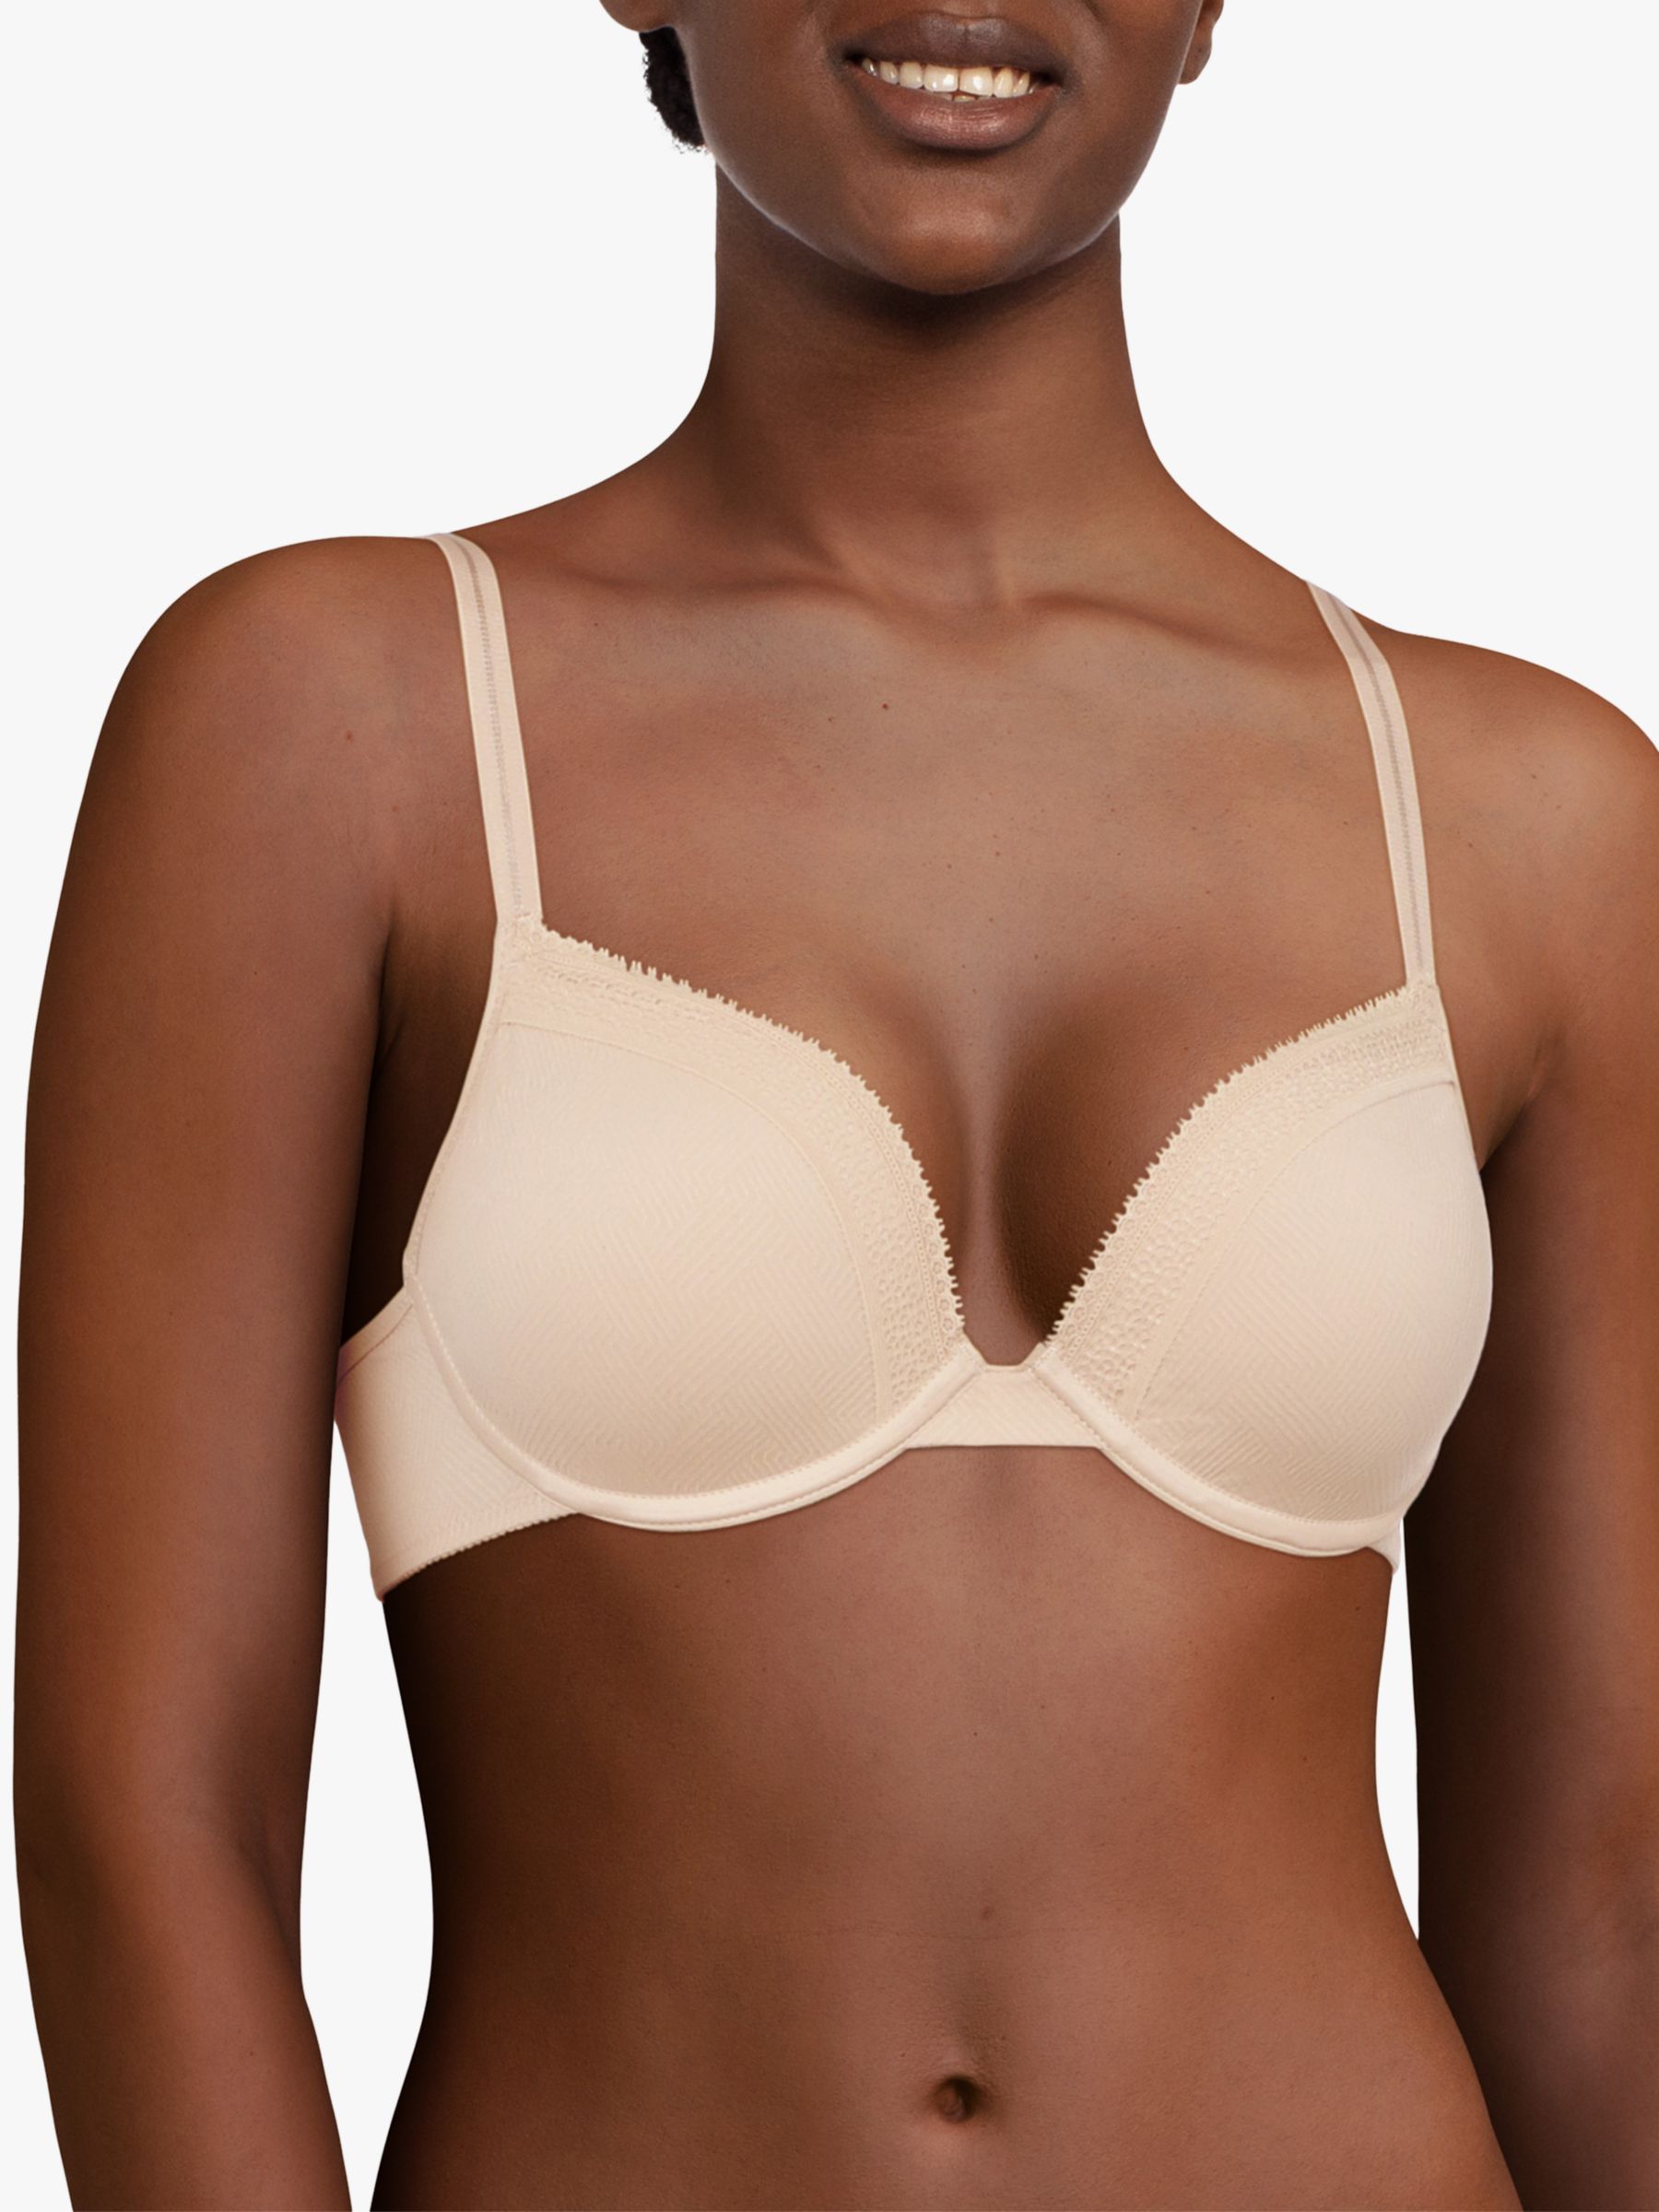 Calvin Klein Perfectly Fit Iris Lace Bra, Baby Blue, 30C